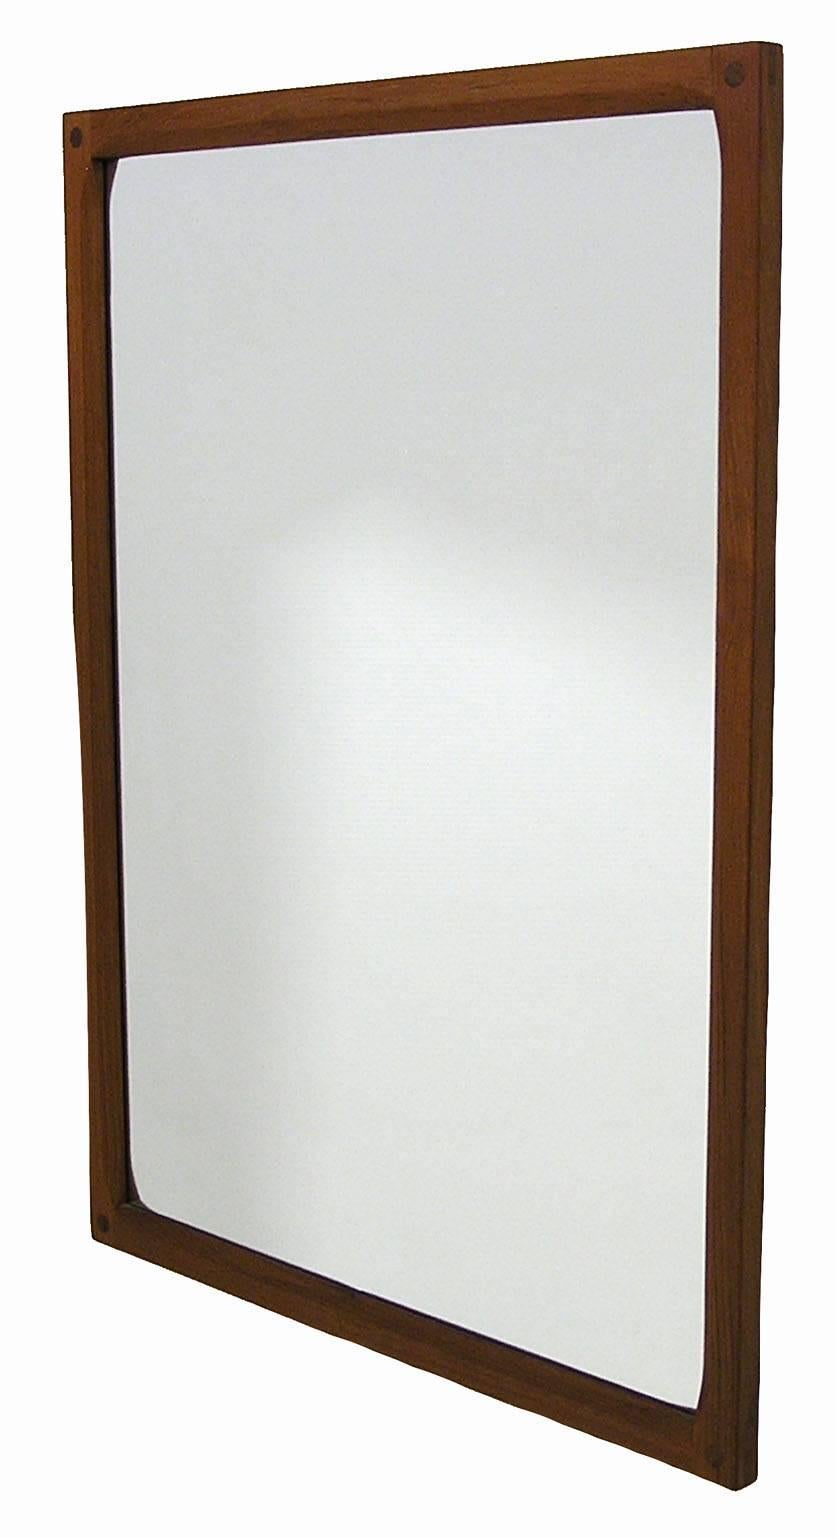 A beautiful teak wall mirror from the 1960s Mid-Century Modern era by Aksel Kjersgaard of Denmark. Gorgeous craftsmanship throughout featuring a solid teak frame with a sculpted inner edge and attractive corner joinery. Excellent condition.